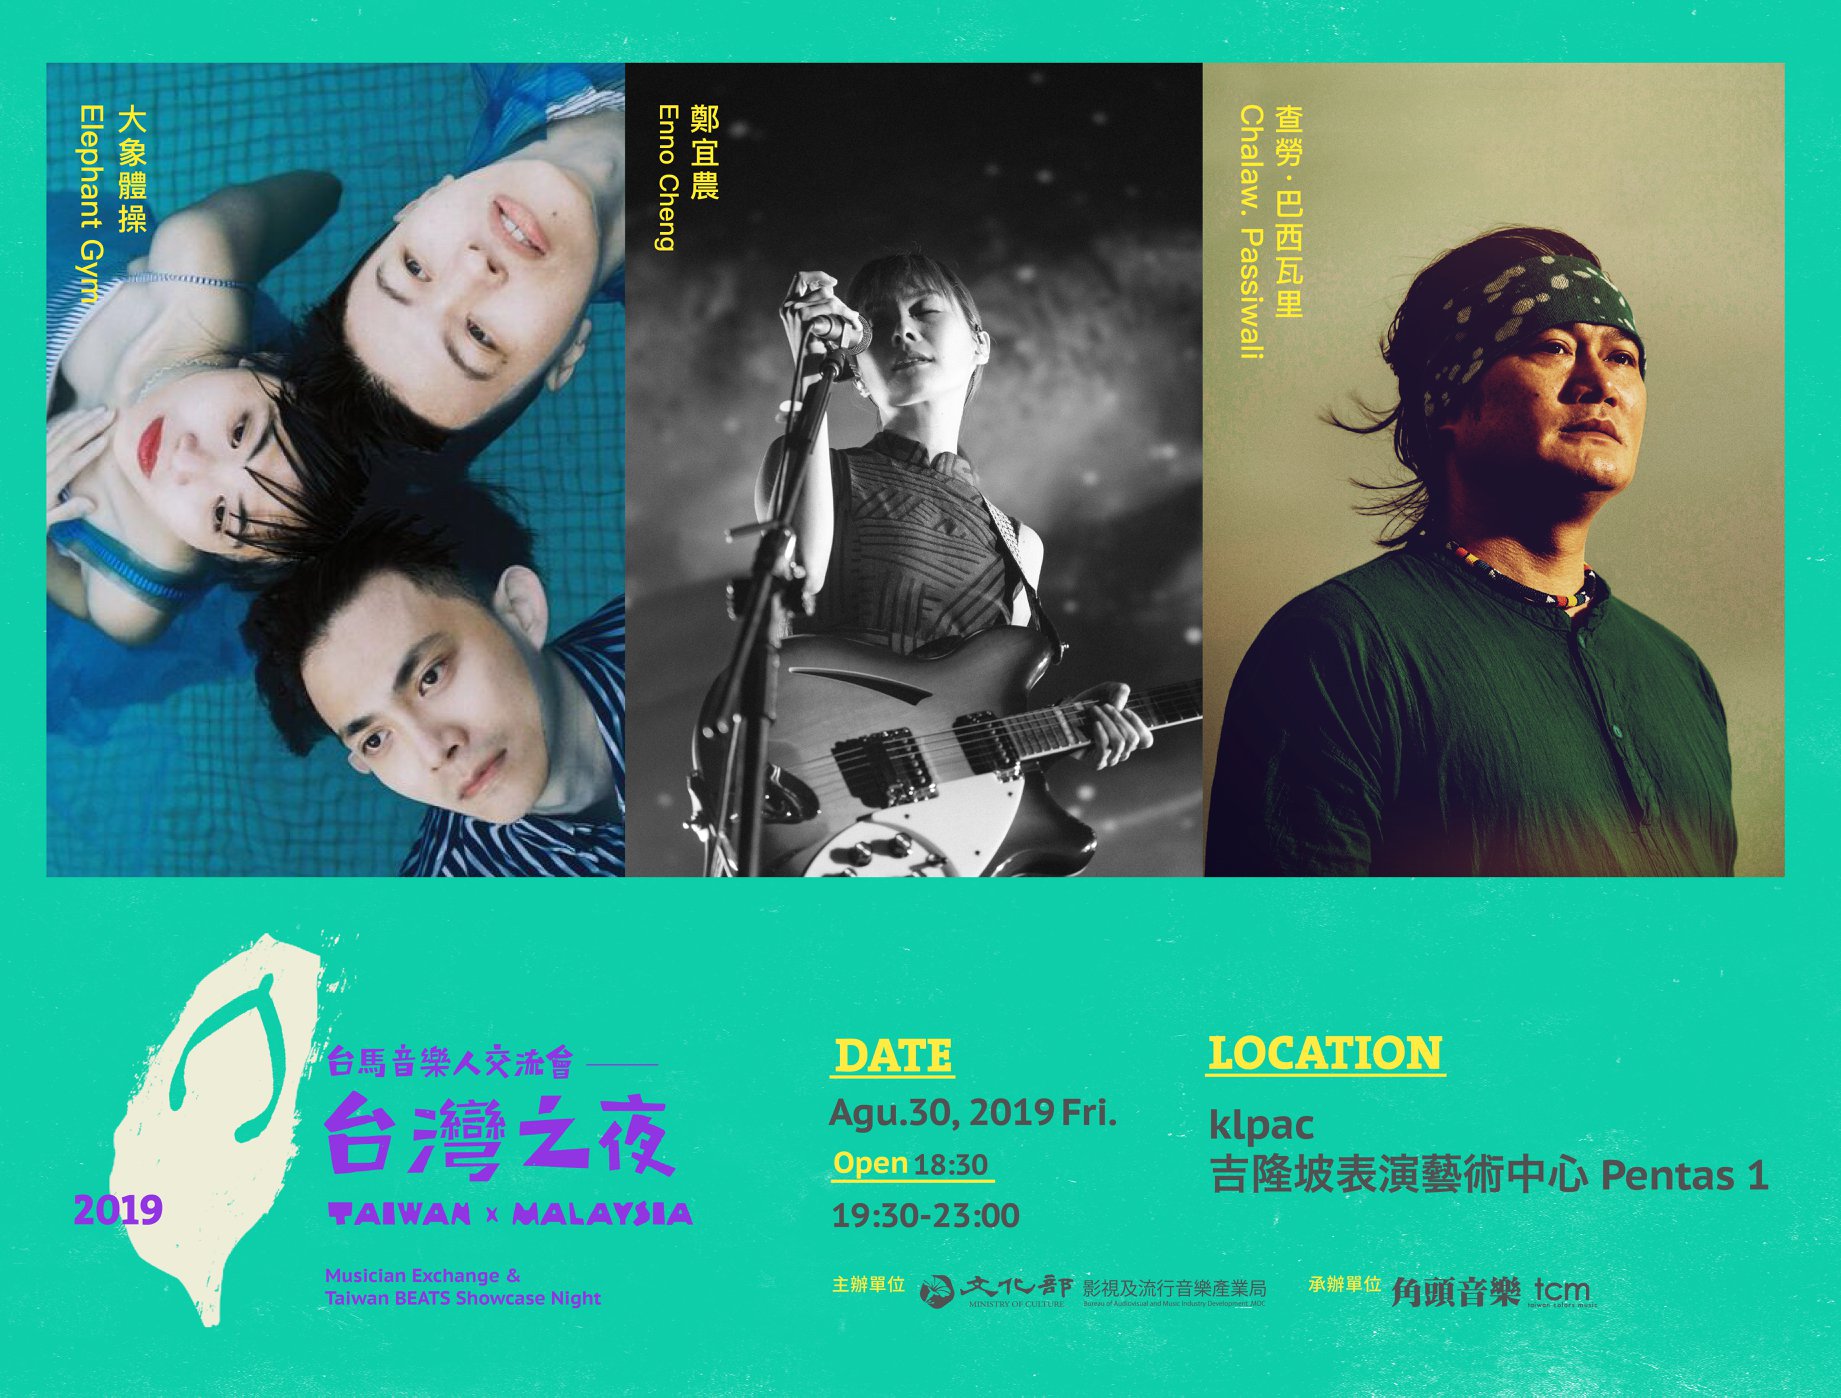 Taiwanese, Malaysian artists to hold joint concert in Kuala Lumpur